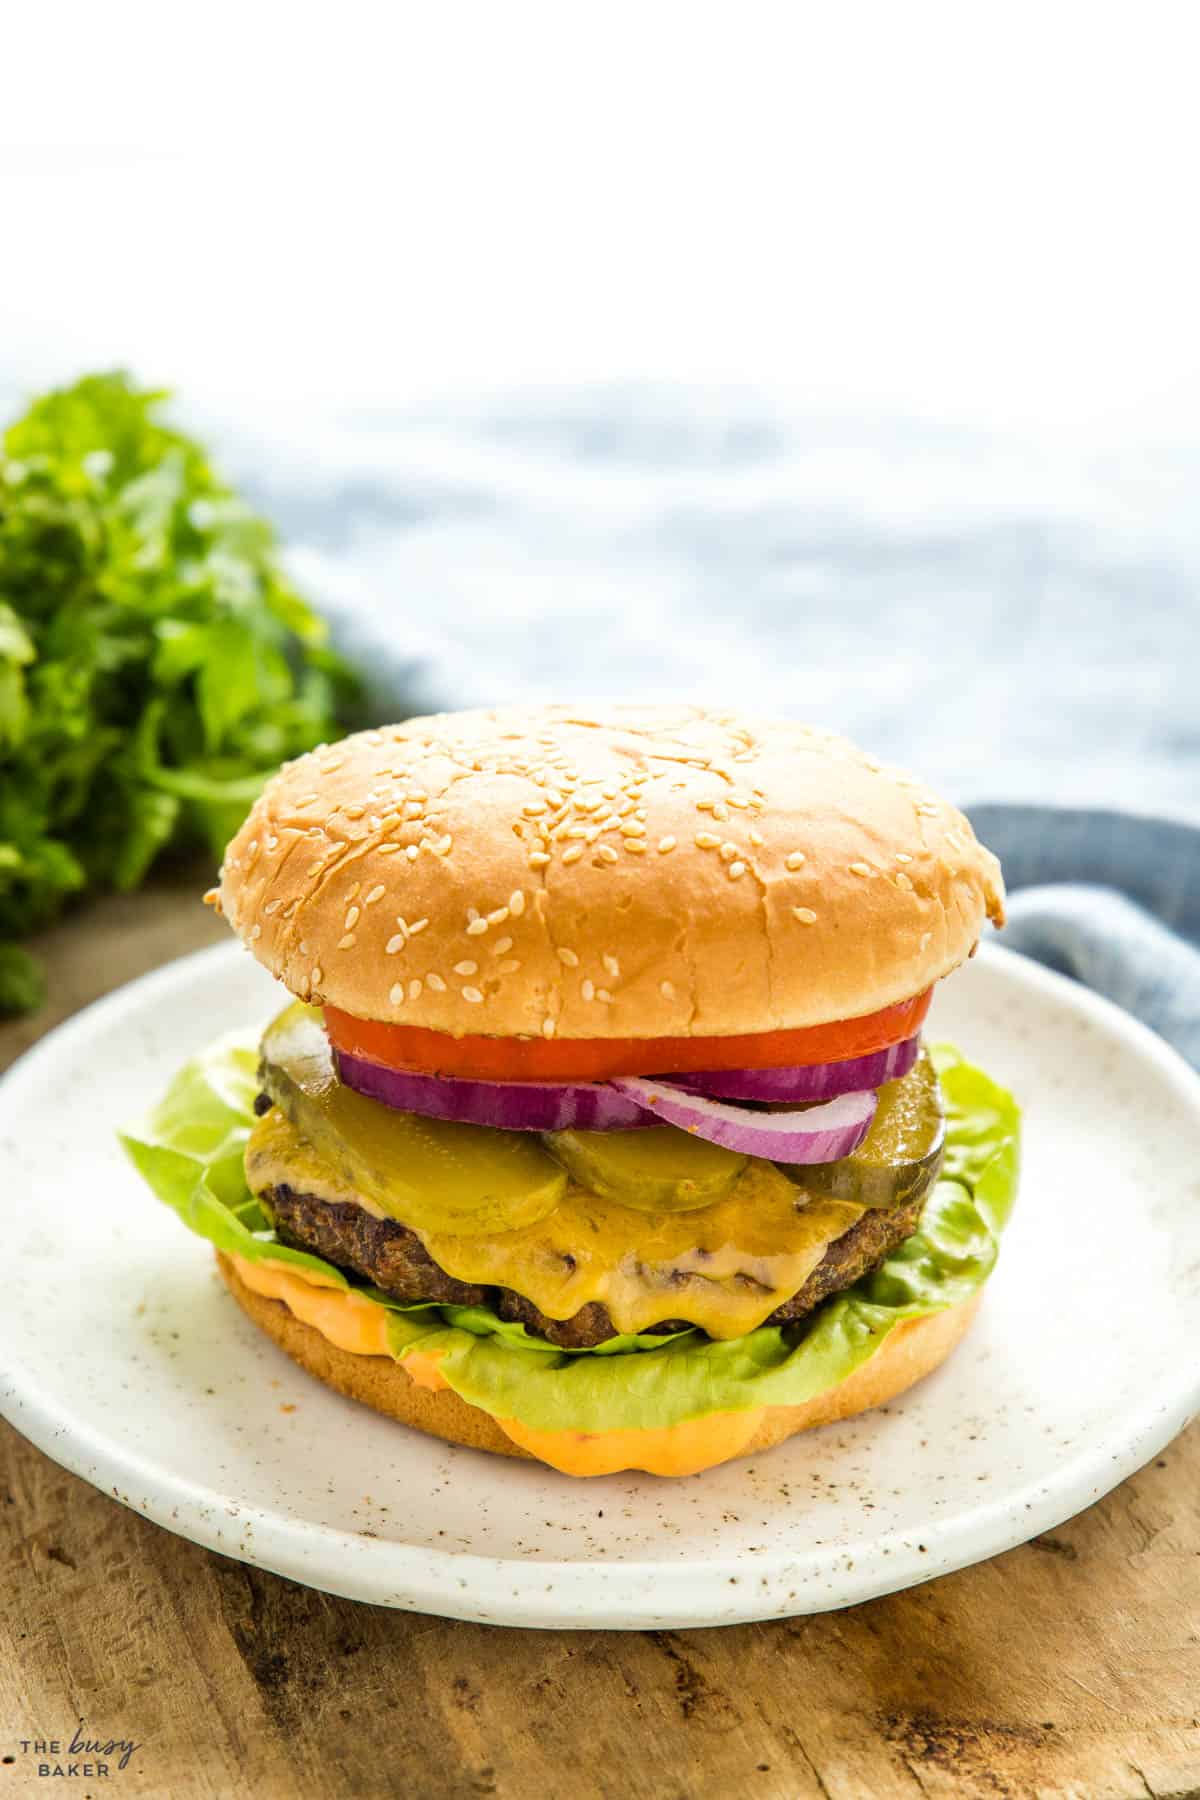 cheeseburger on a sesame seed bun with pickles, onions, tomato, lettuce and burger sauce